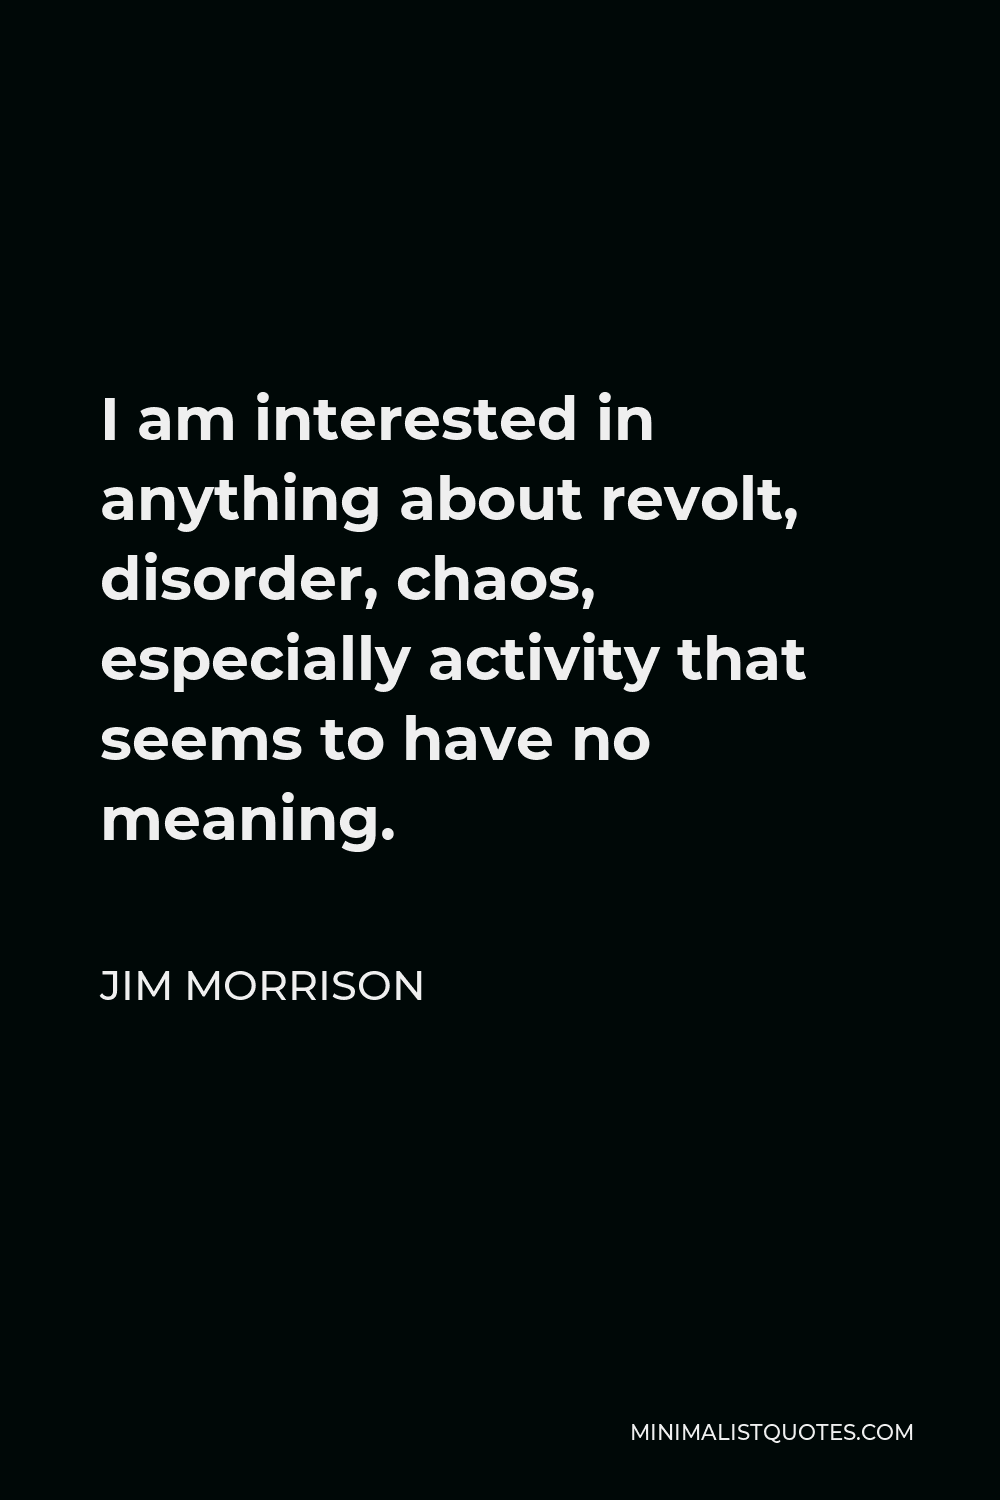 Jim Morrison Quote - I am interested in anything about revolt, disorder, chaos-especially activity that seems to have no meaning. It seems to me to be the road toward freedom…